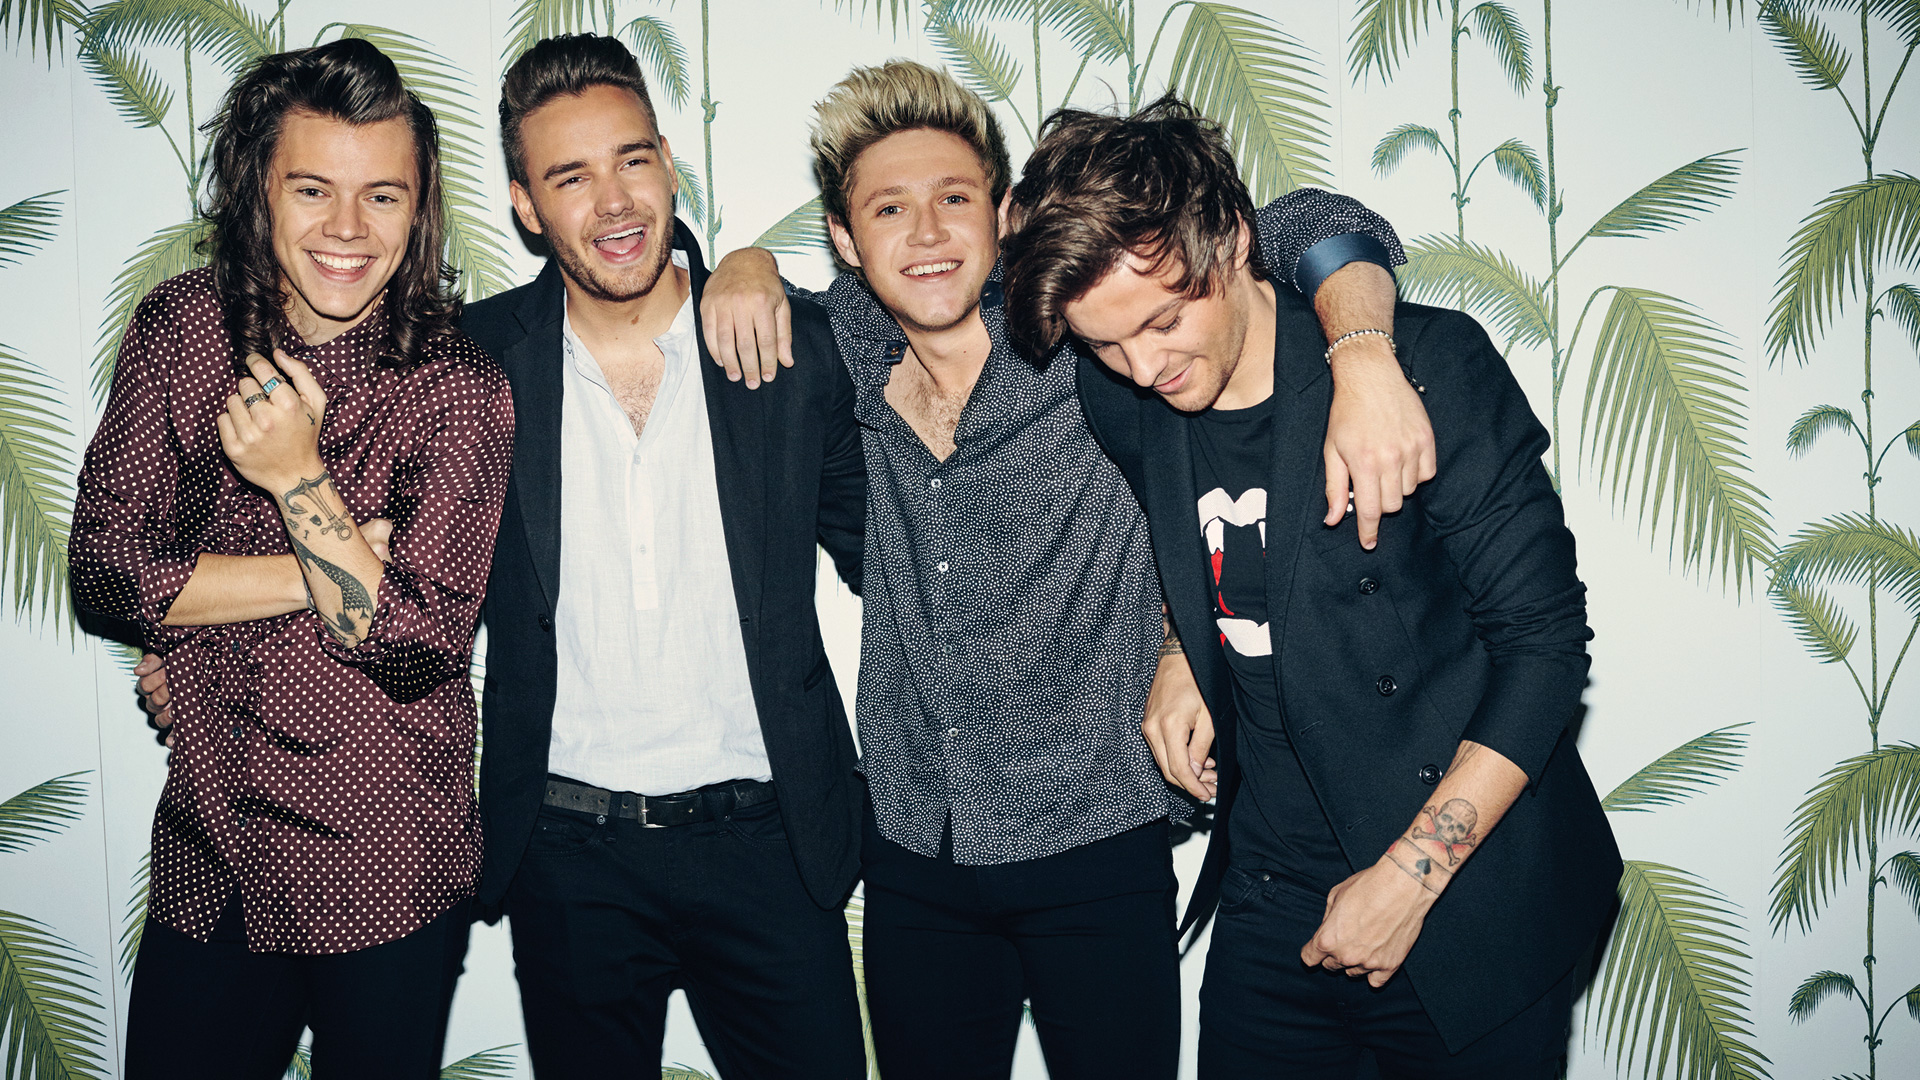 One Direction Drag Me Down Photoshoot - HD Wallpaper 